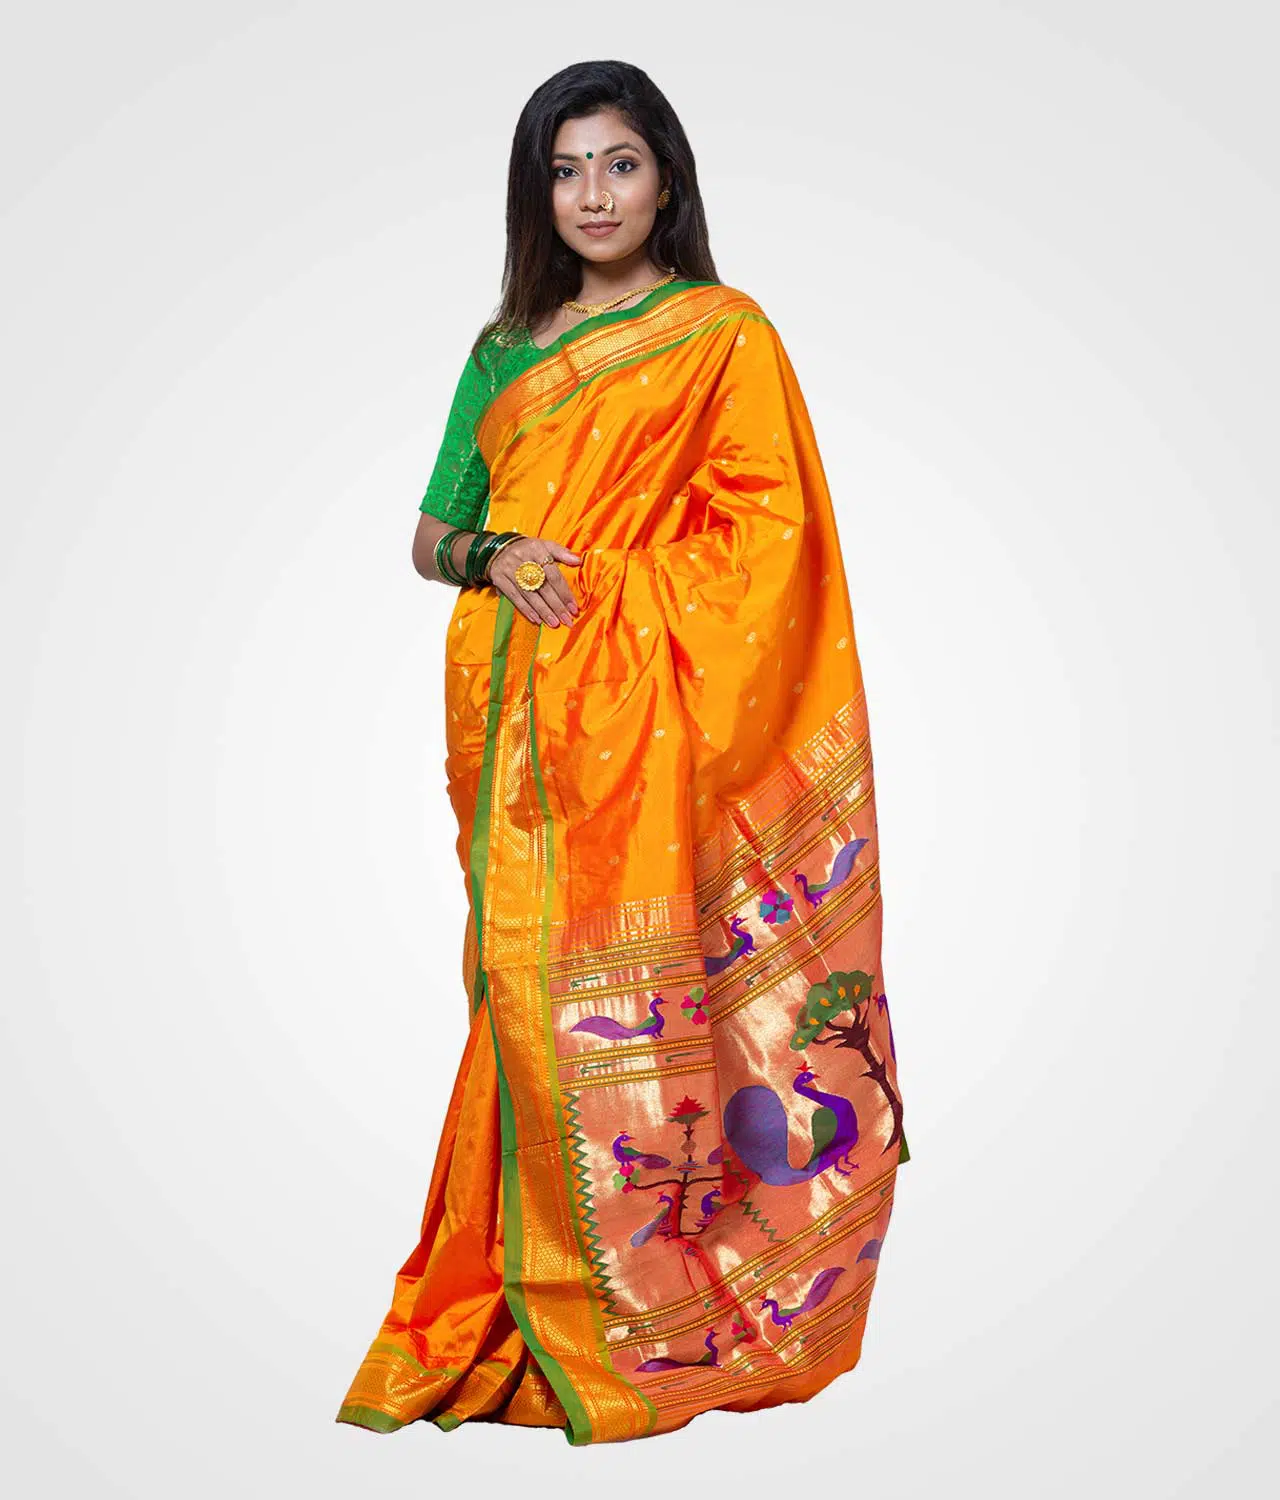 What is the best place to buy Paithani sarees in Mumbai? - Quora